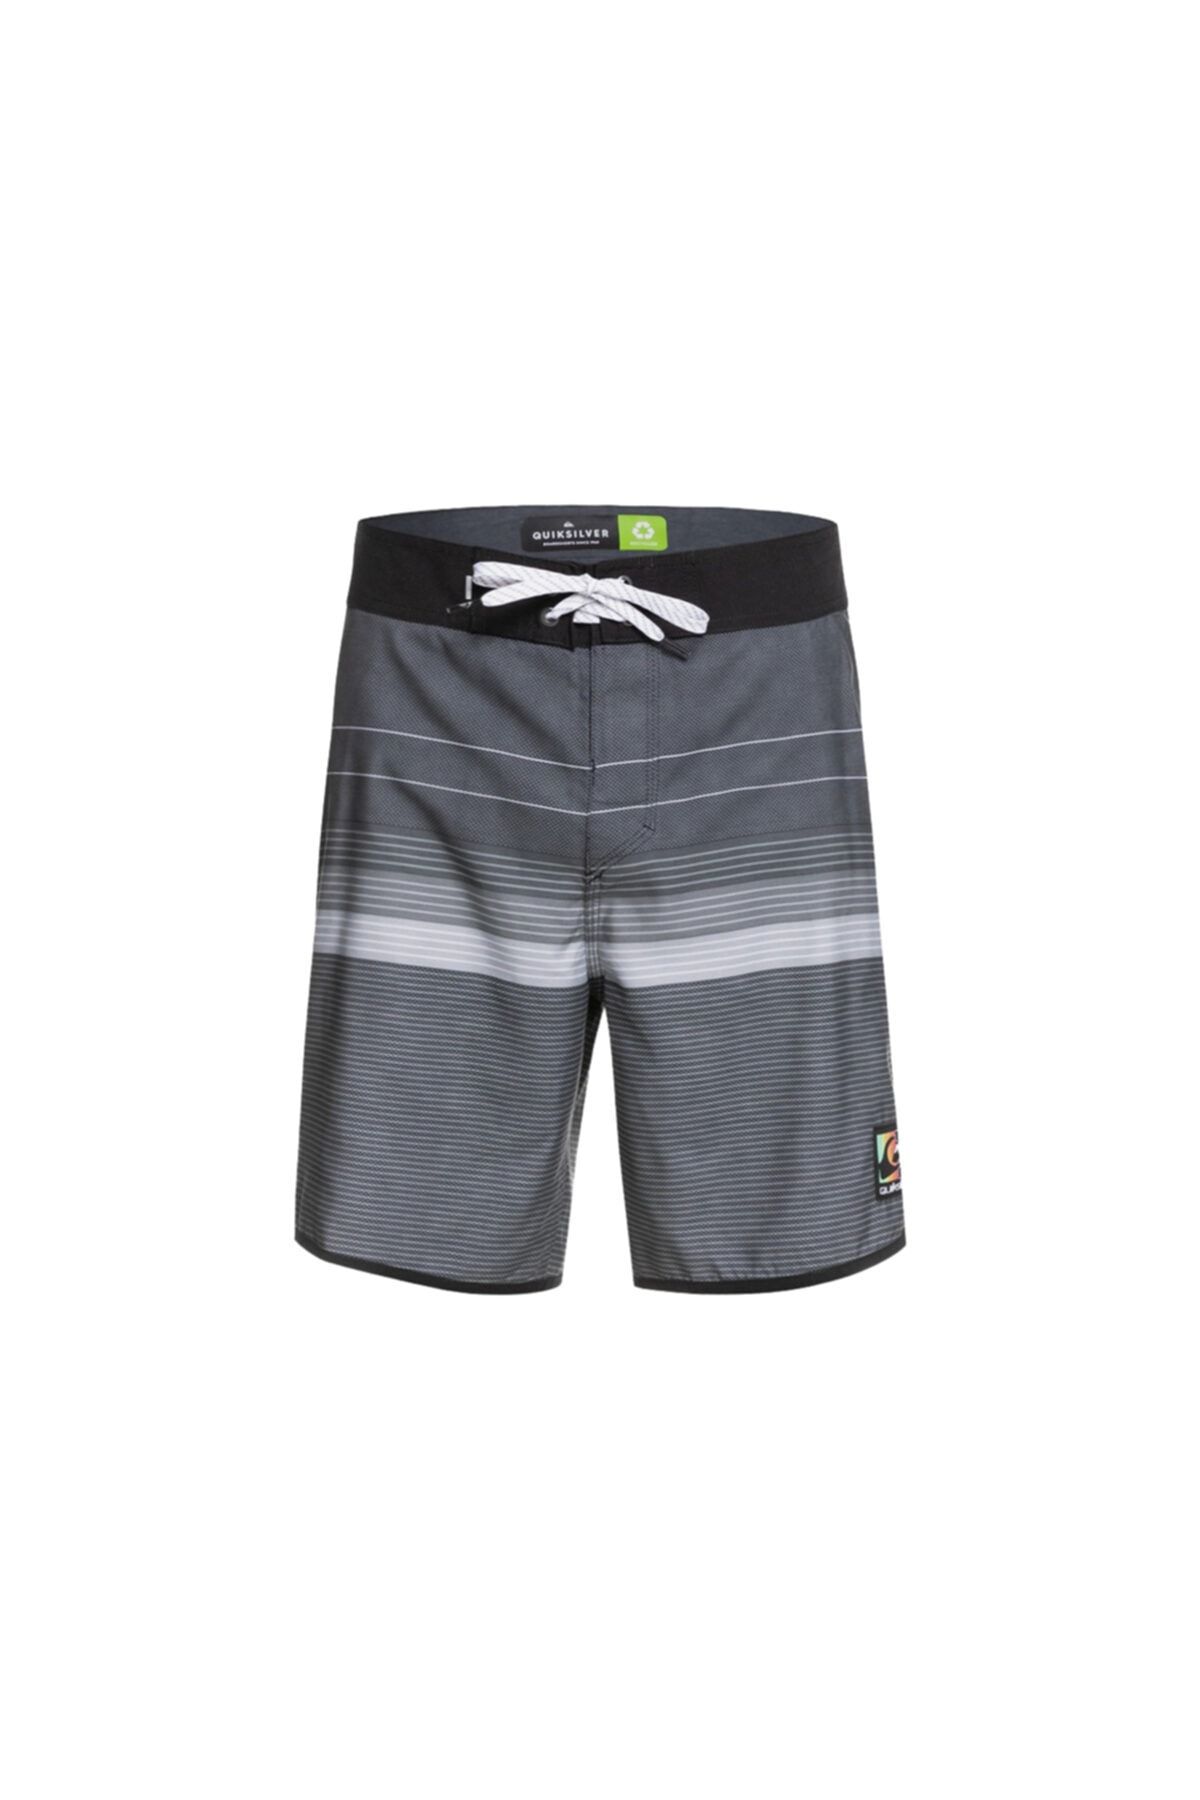 Quiksilver Everyday More Core Şort 18